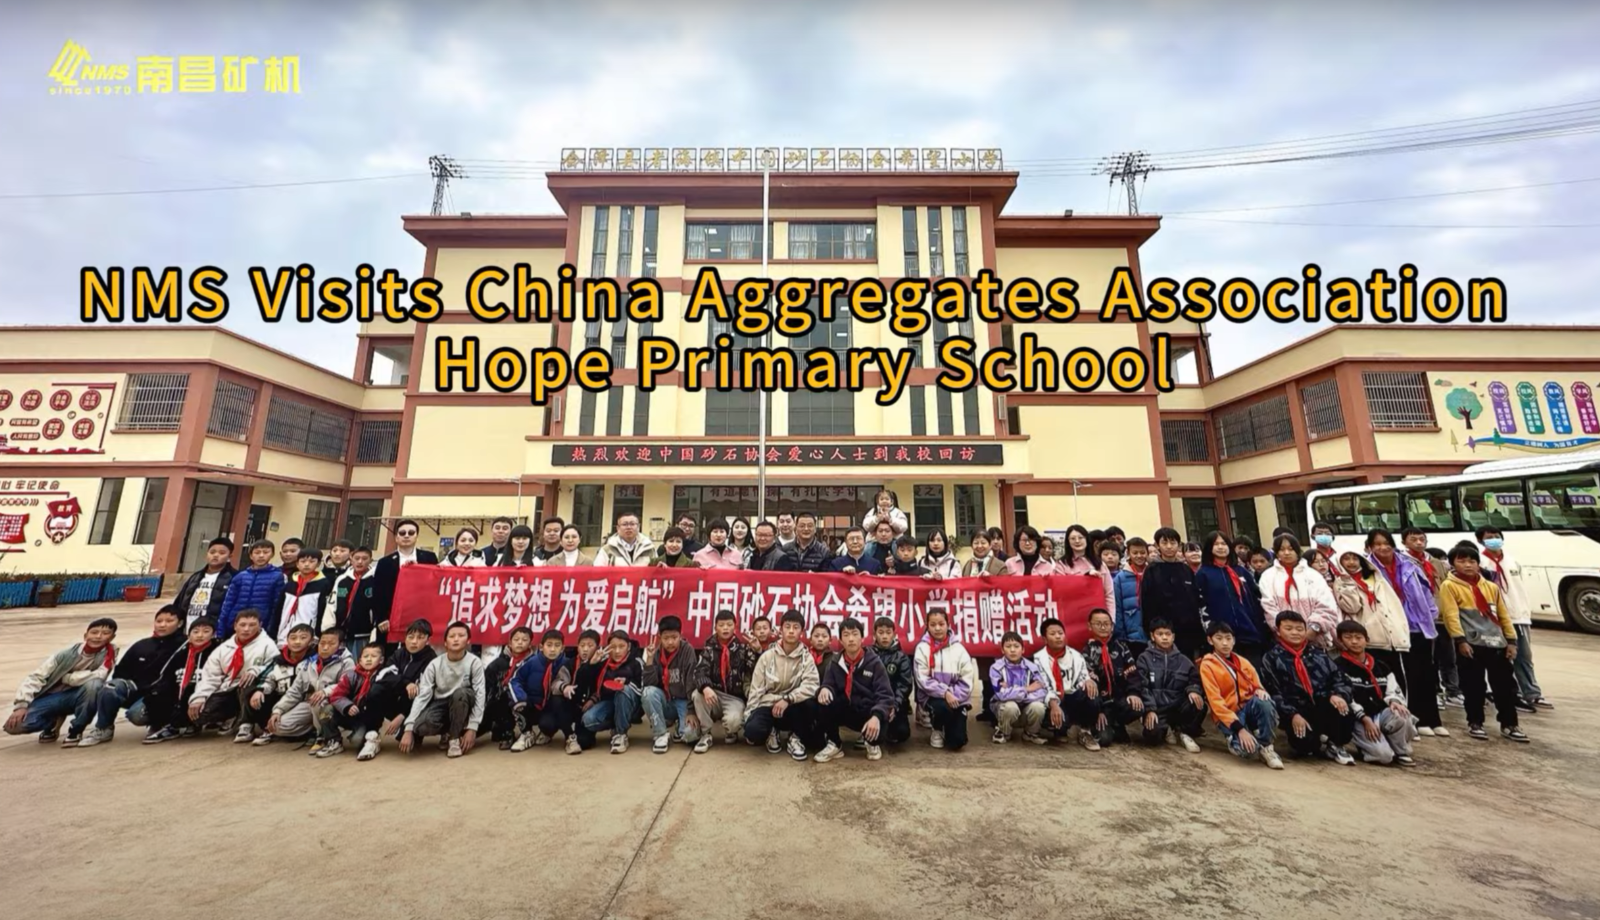 NMS Supports China Aggregates Association Hope Primary School with Charitable Donations